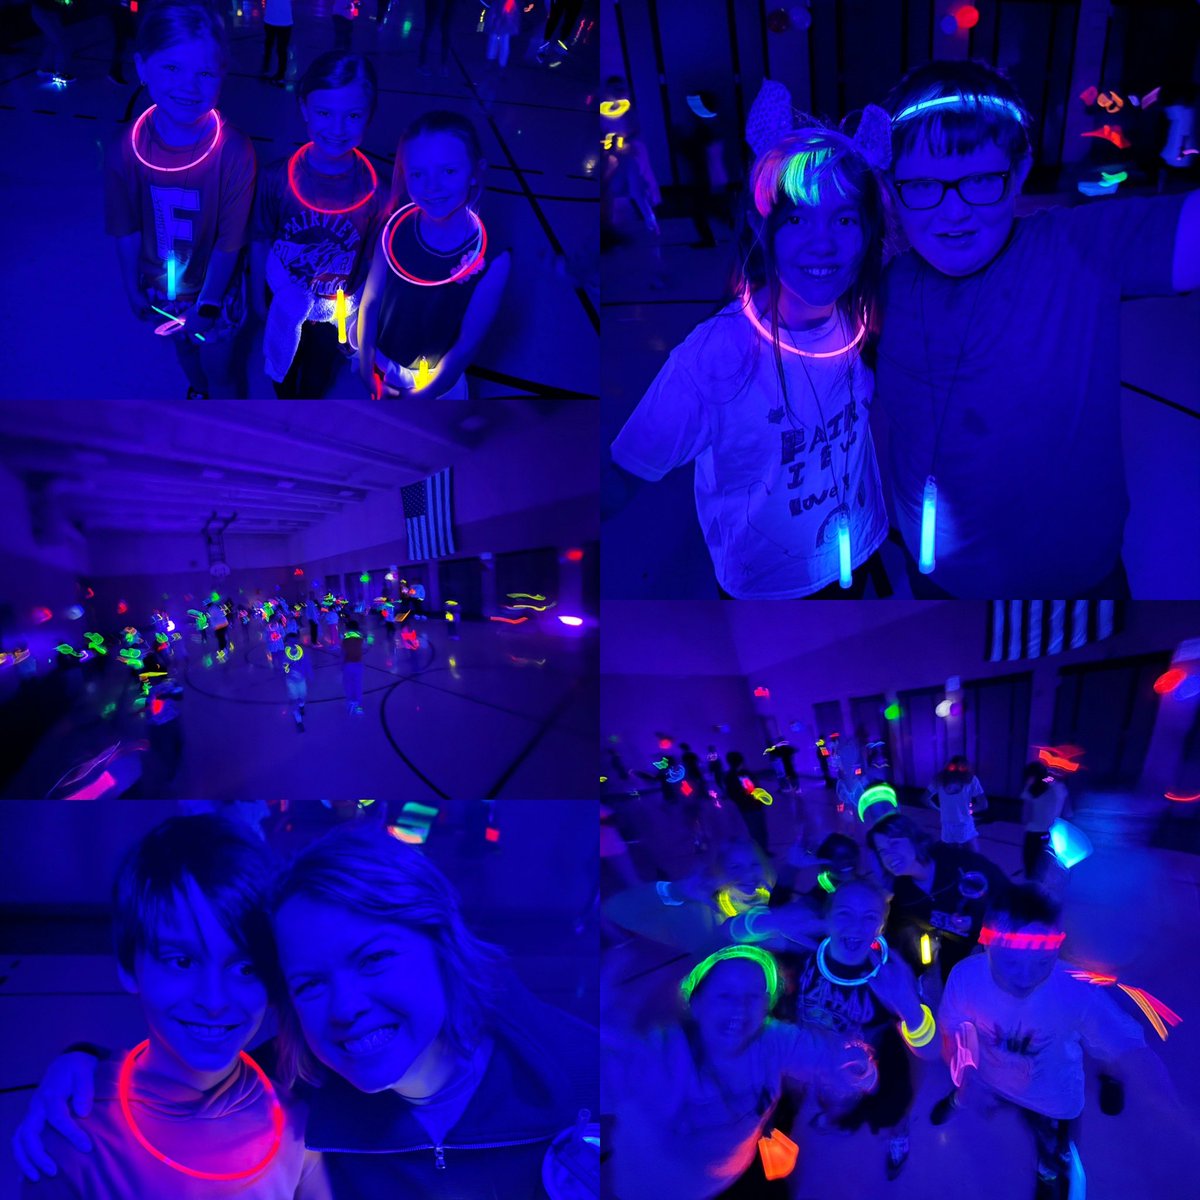 WOW! Our students exceeded our @edmentum Spring Challenge expectations by earning 4,205 trophies in SIX WEEKS! That’s 205 over our initial goal!! 🙌🏼🙌🏼

Today we celebrated with Grade Level Glow Parties. It was a ROCKIN’ time, @FVFirebirds1!! 🎸😎🏆

#bpsne #TeamBPS